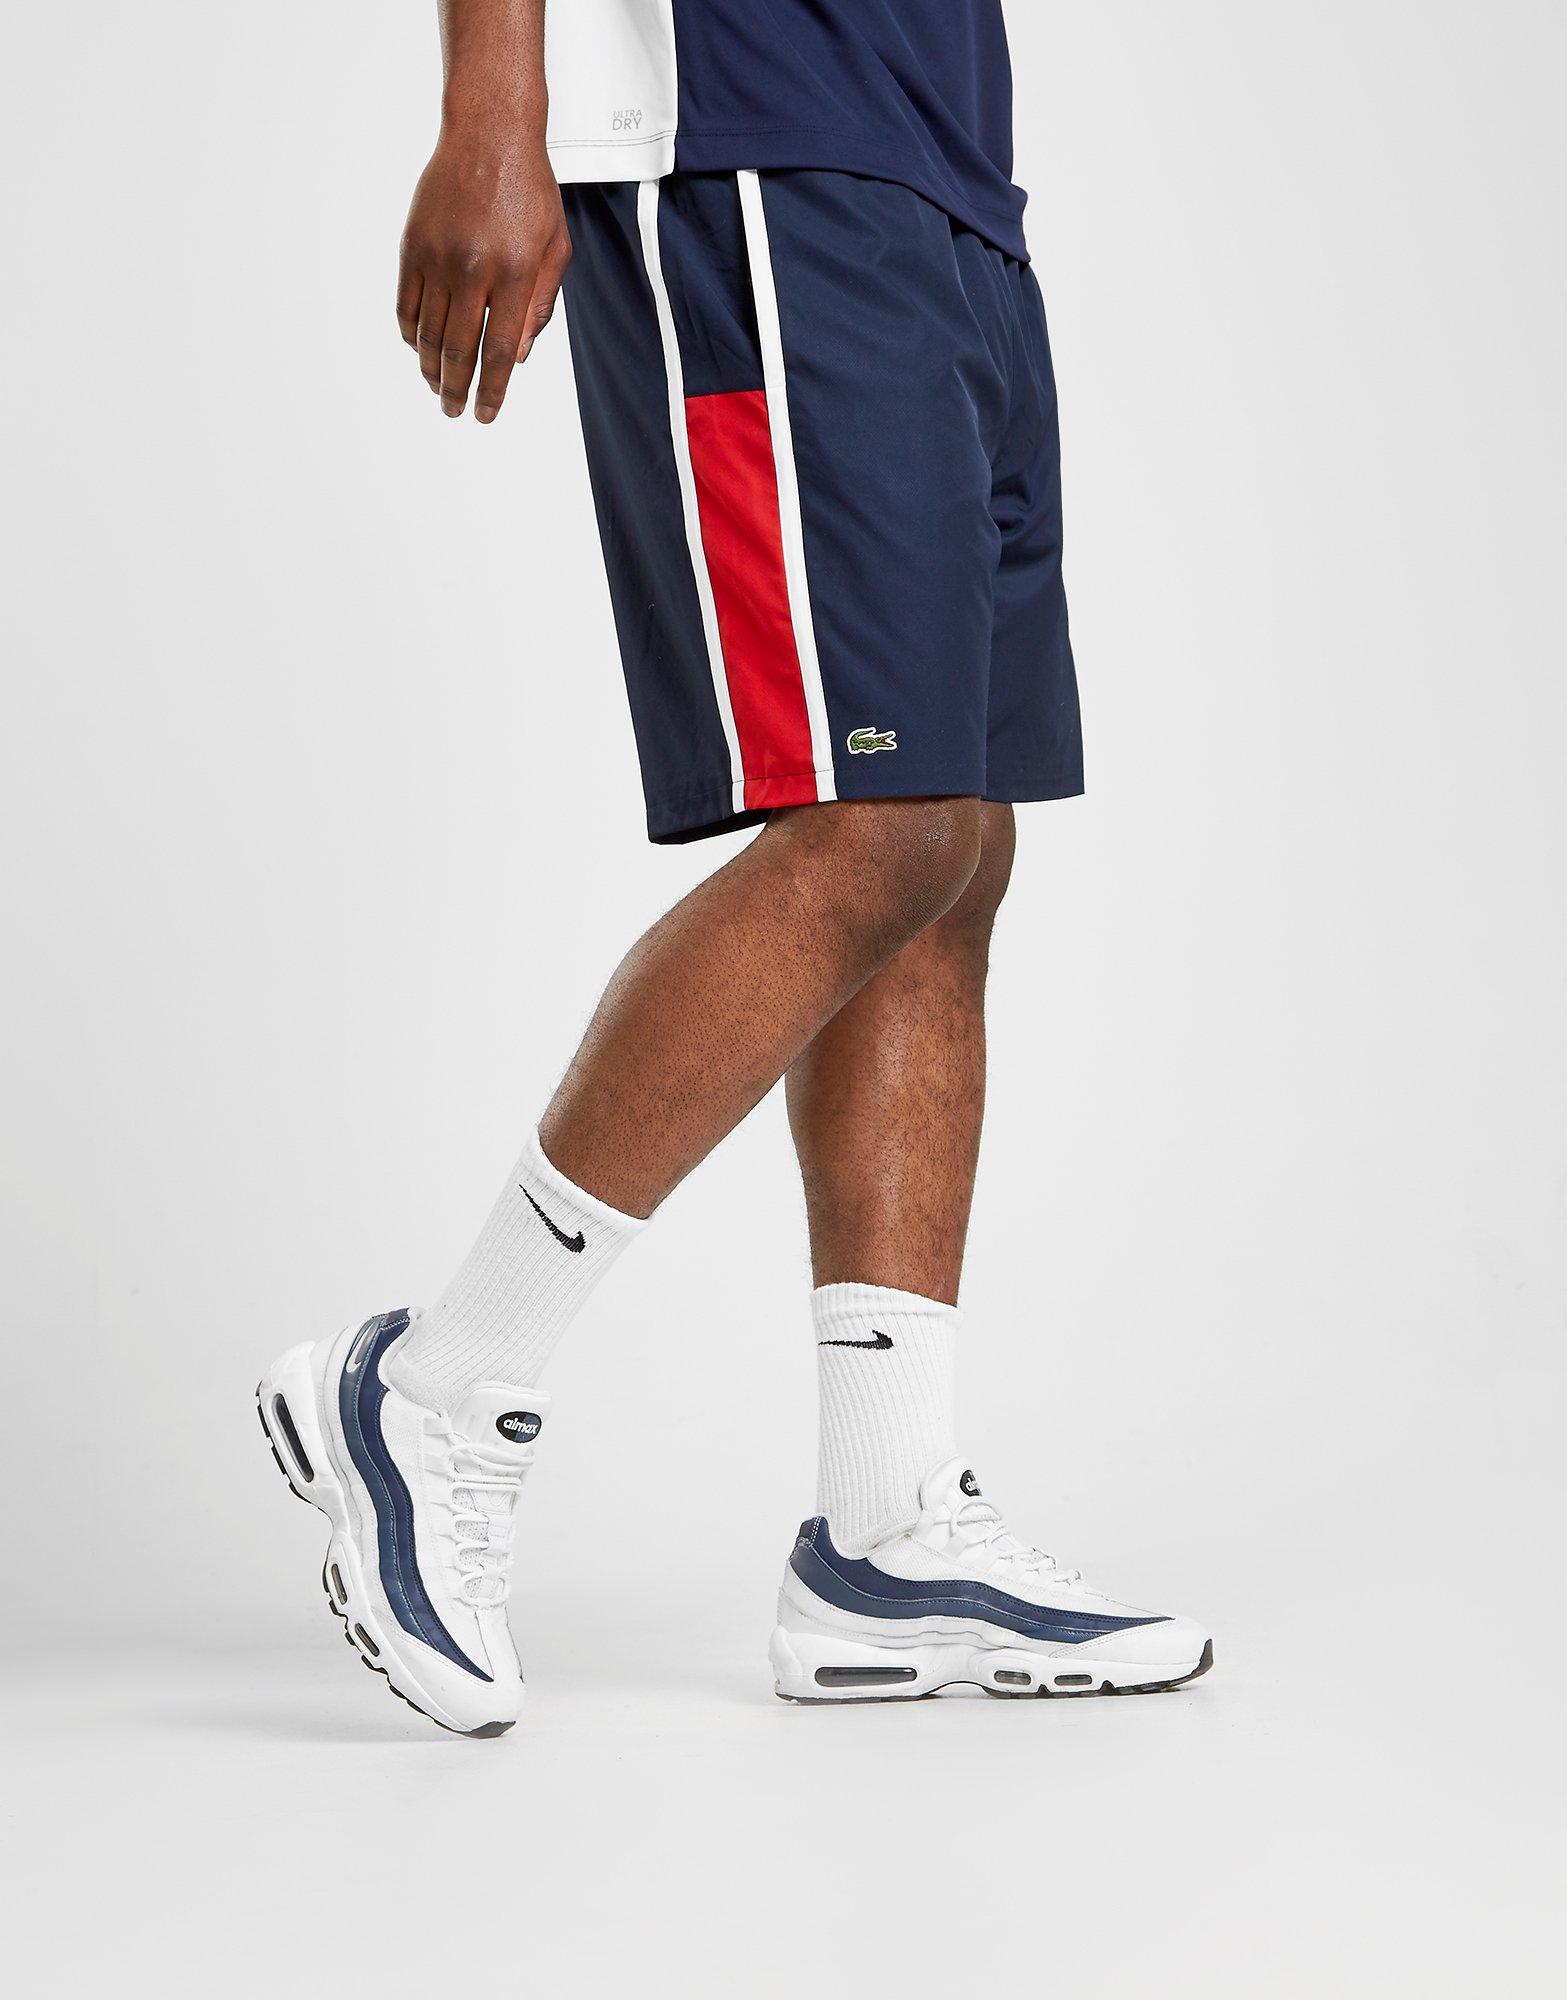 Blue Lacoste Footing Shorts | JD Sports